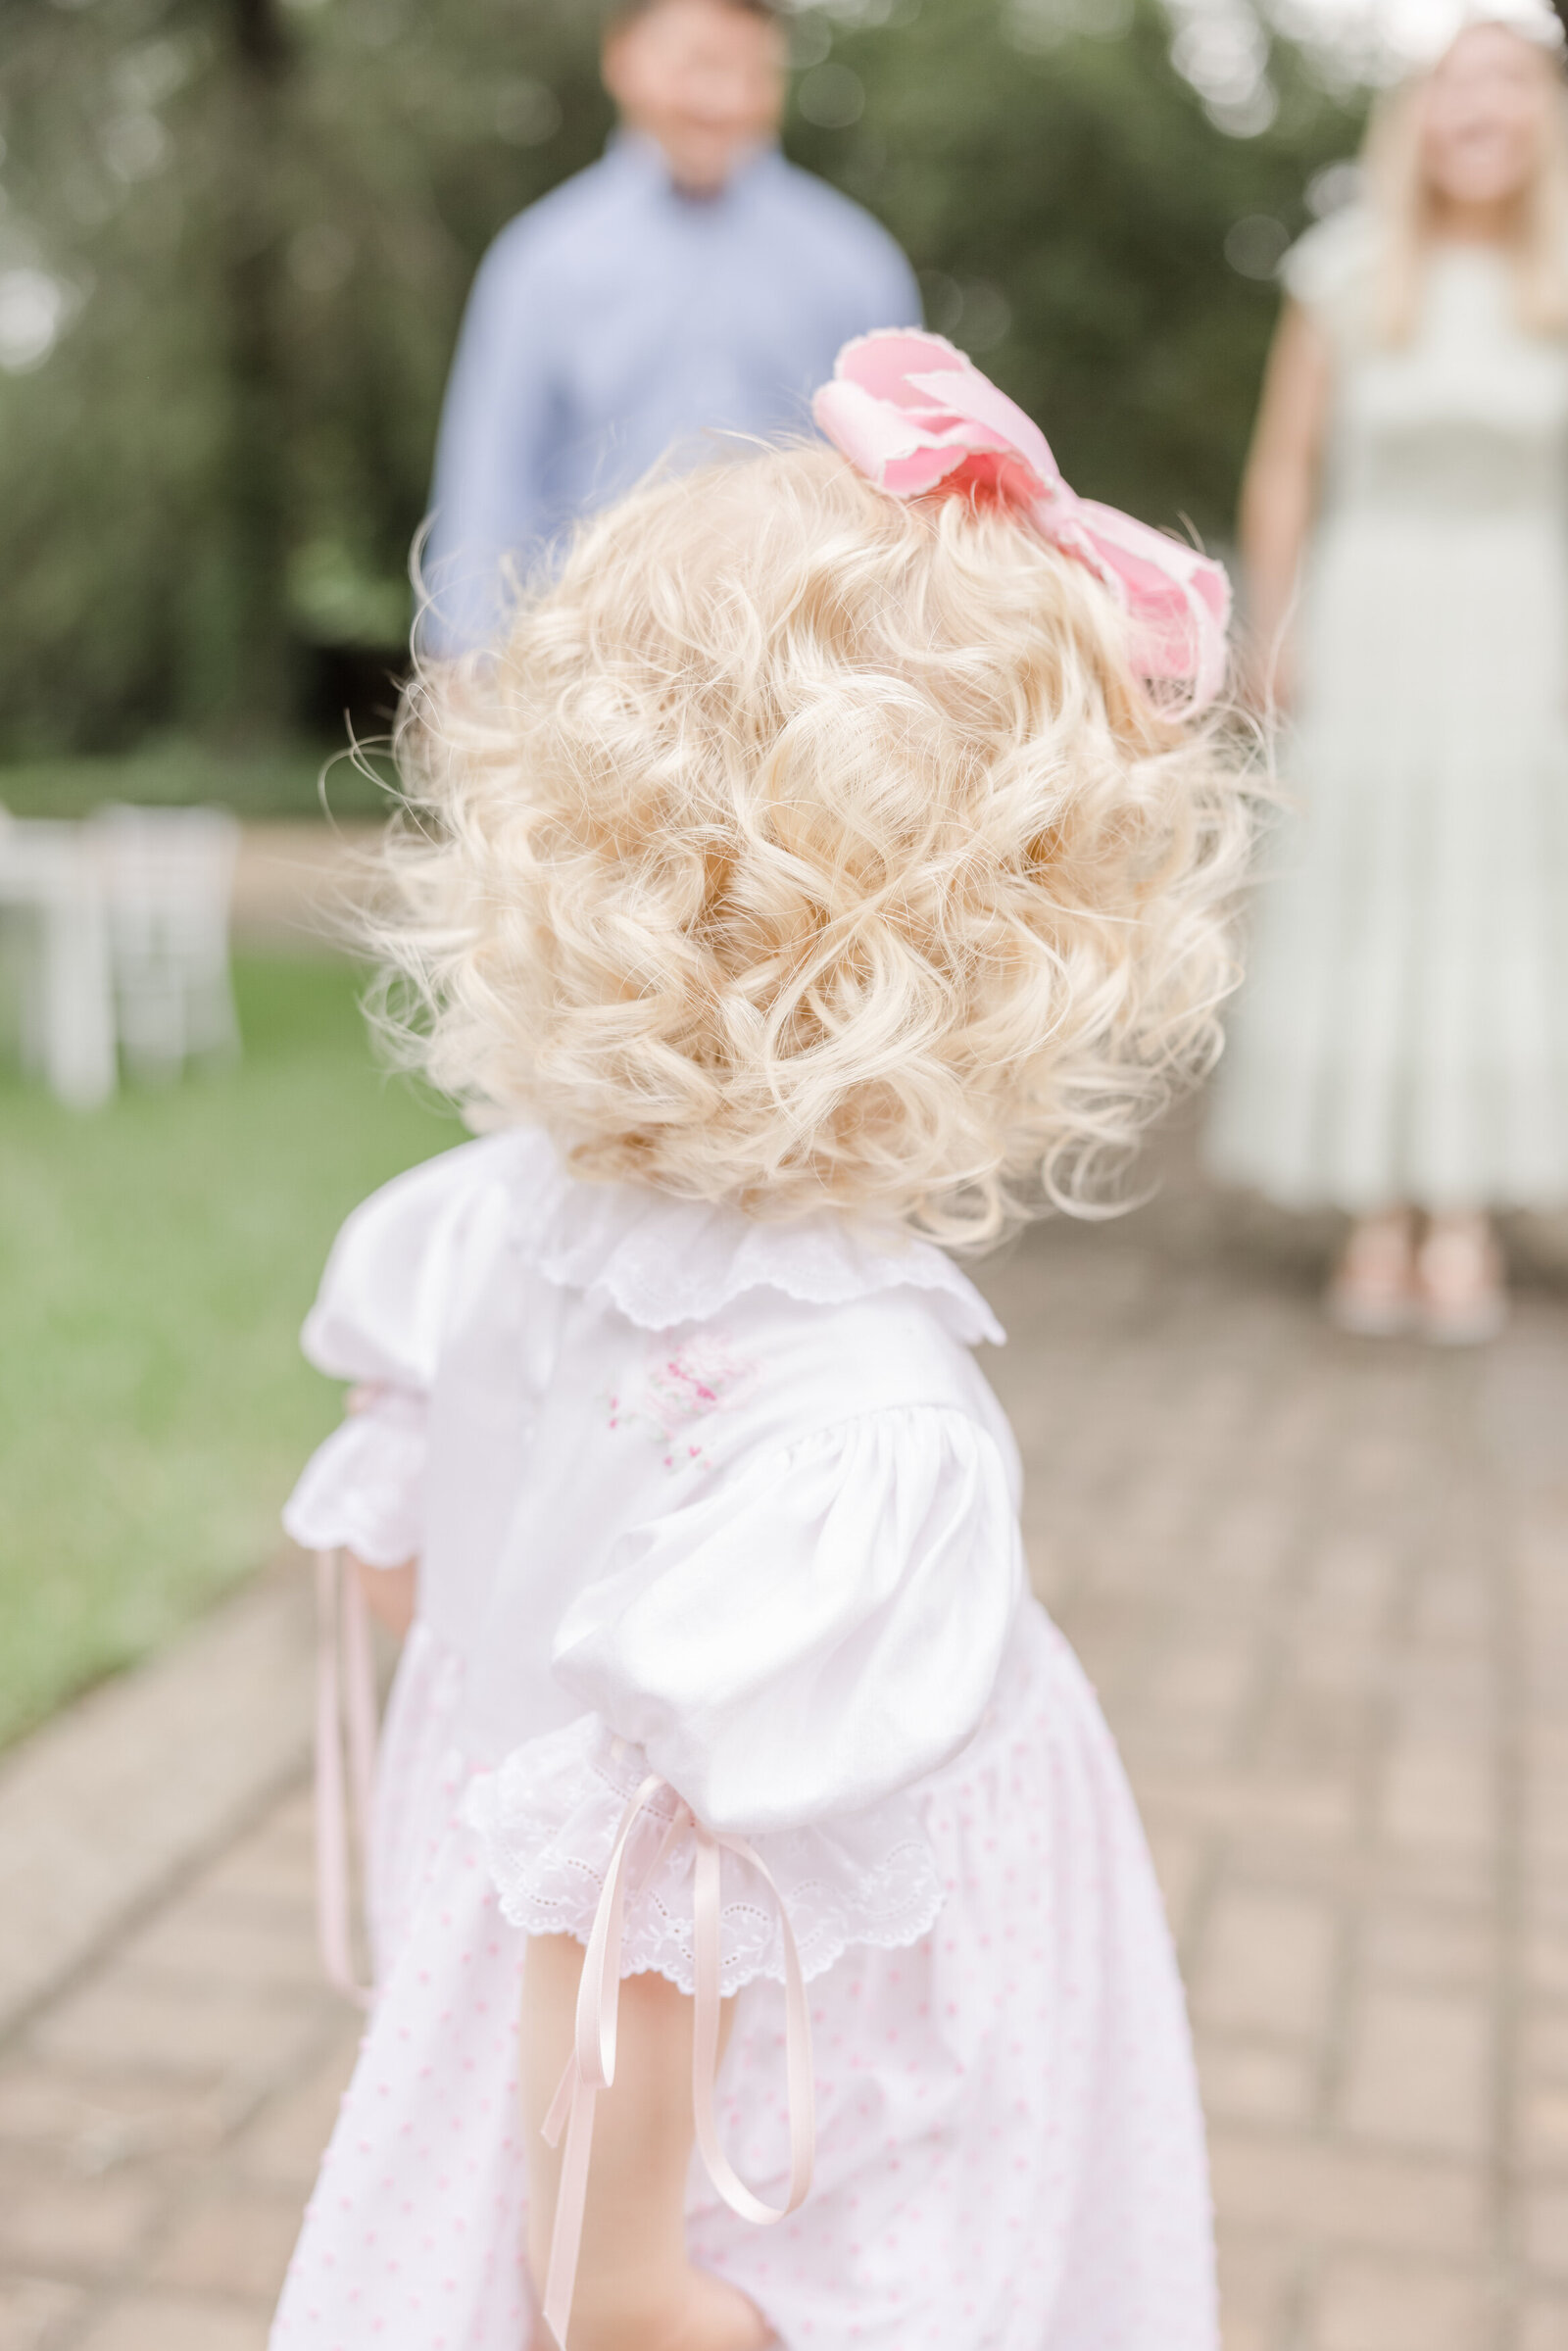 The blonde curls of a toddler.